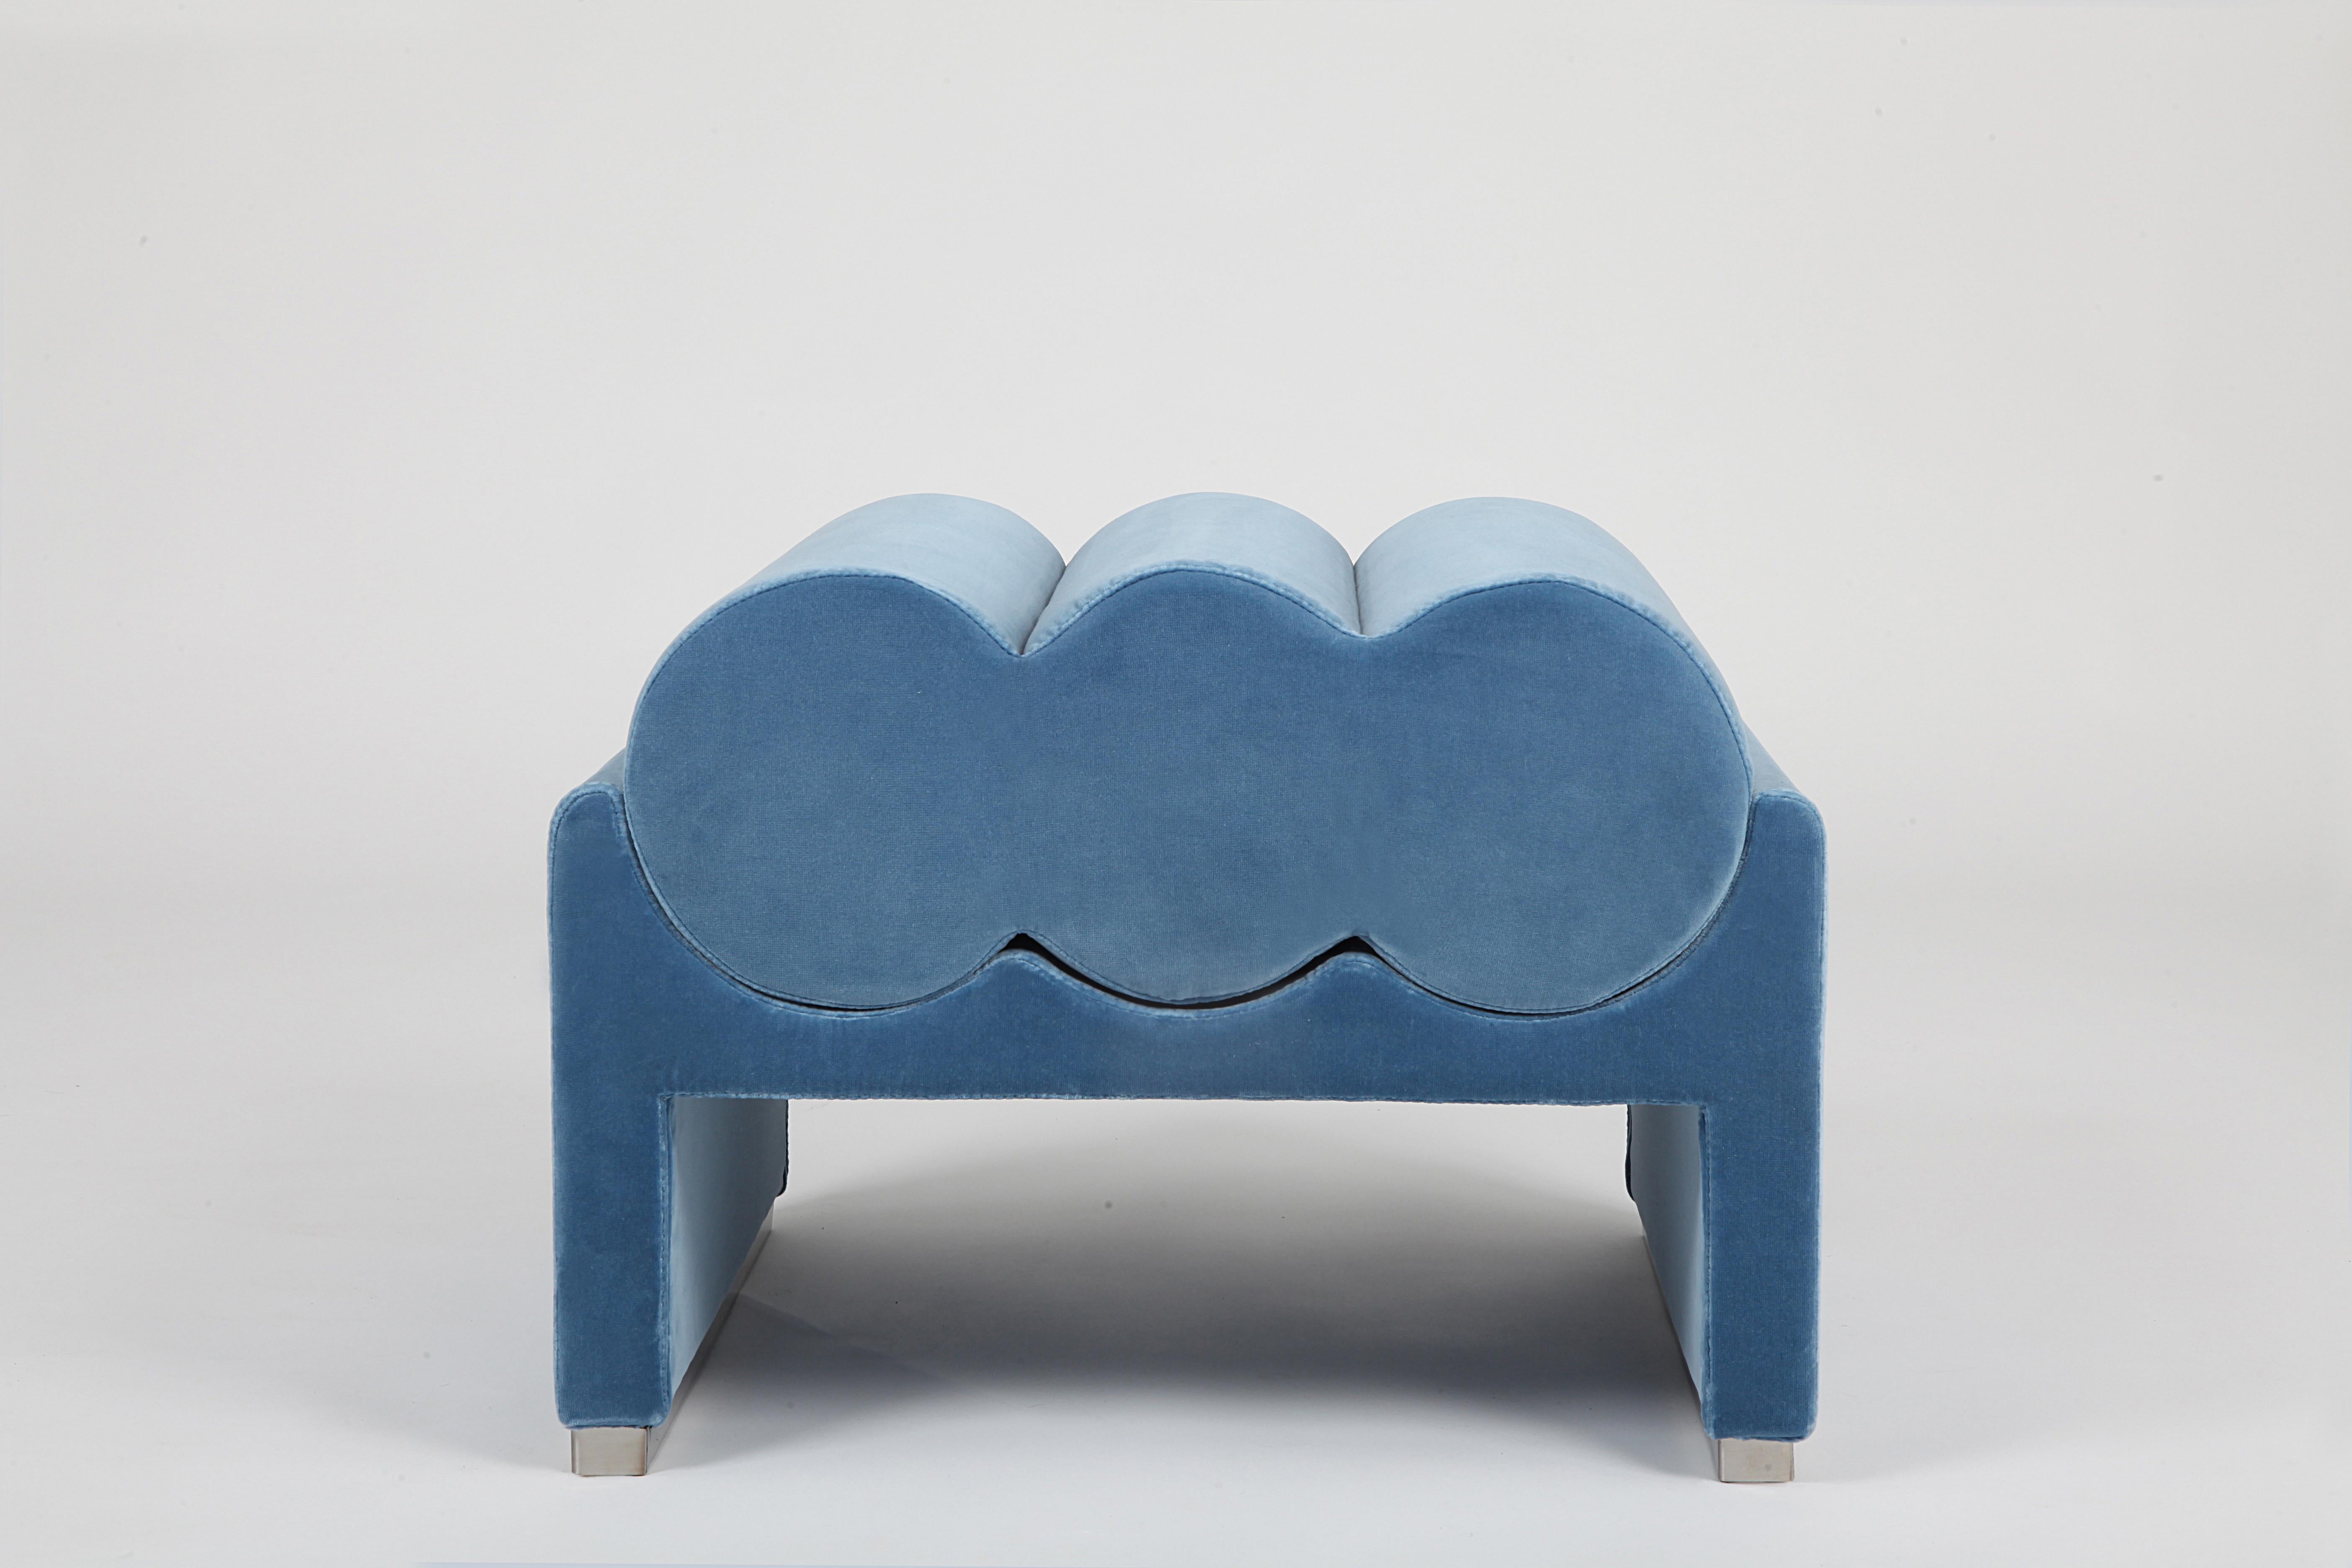 Jeans Velvet Kyl Short Pouf by Dalmoto
Dimensions: D 51 x W 55 x H 40 cm. SH: 40 cm.
Materials: Metal and velvet.

Available in different upholstery options and finishes. Available in two sizes. Please contact us. 

Kyl is a fabric pouf inspired by